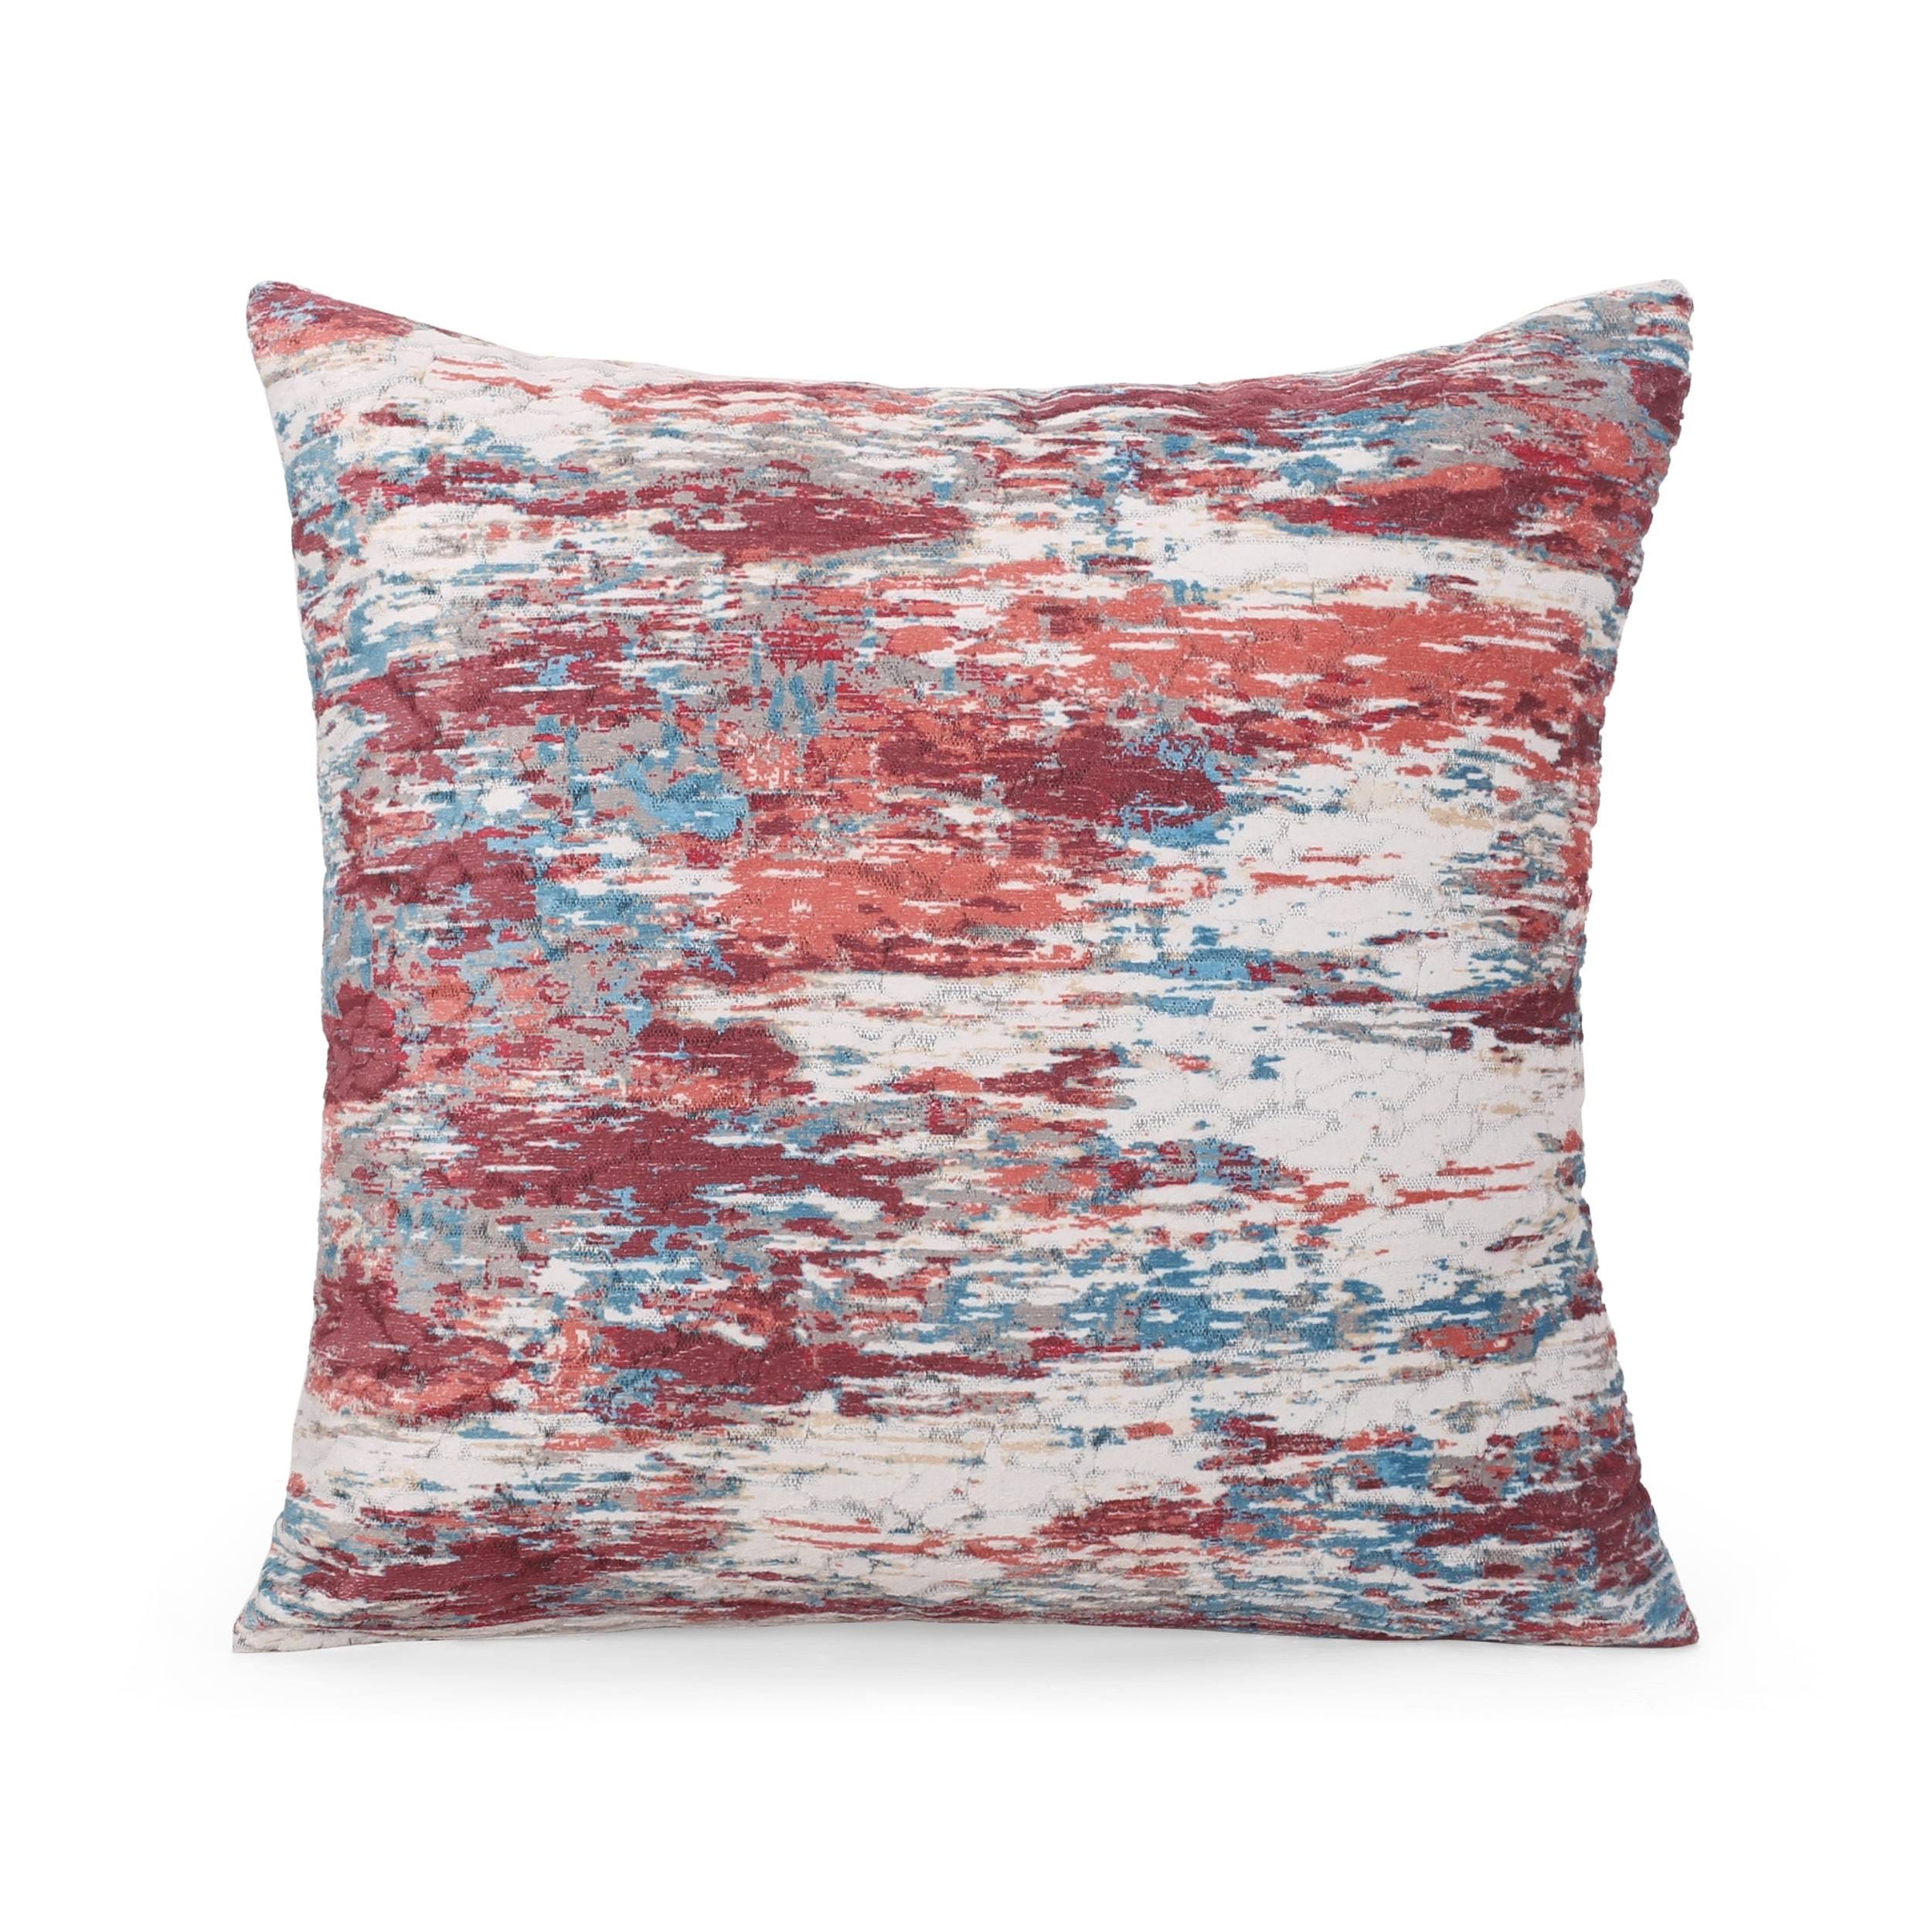 Colorful Fabric Throw Pillow with Modern Style | Image